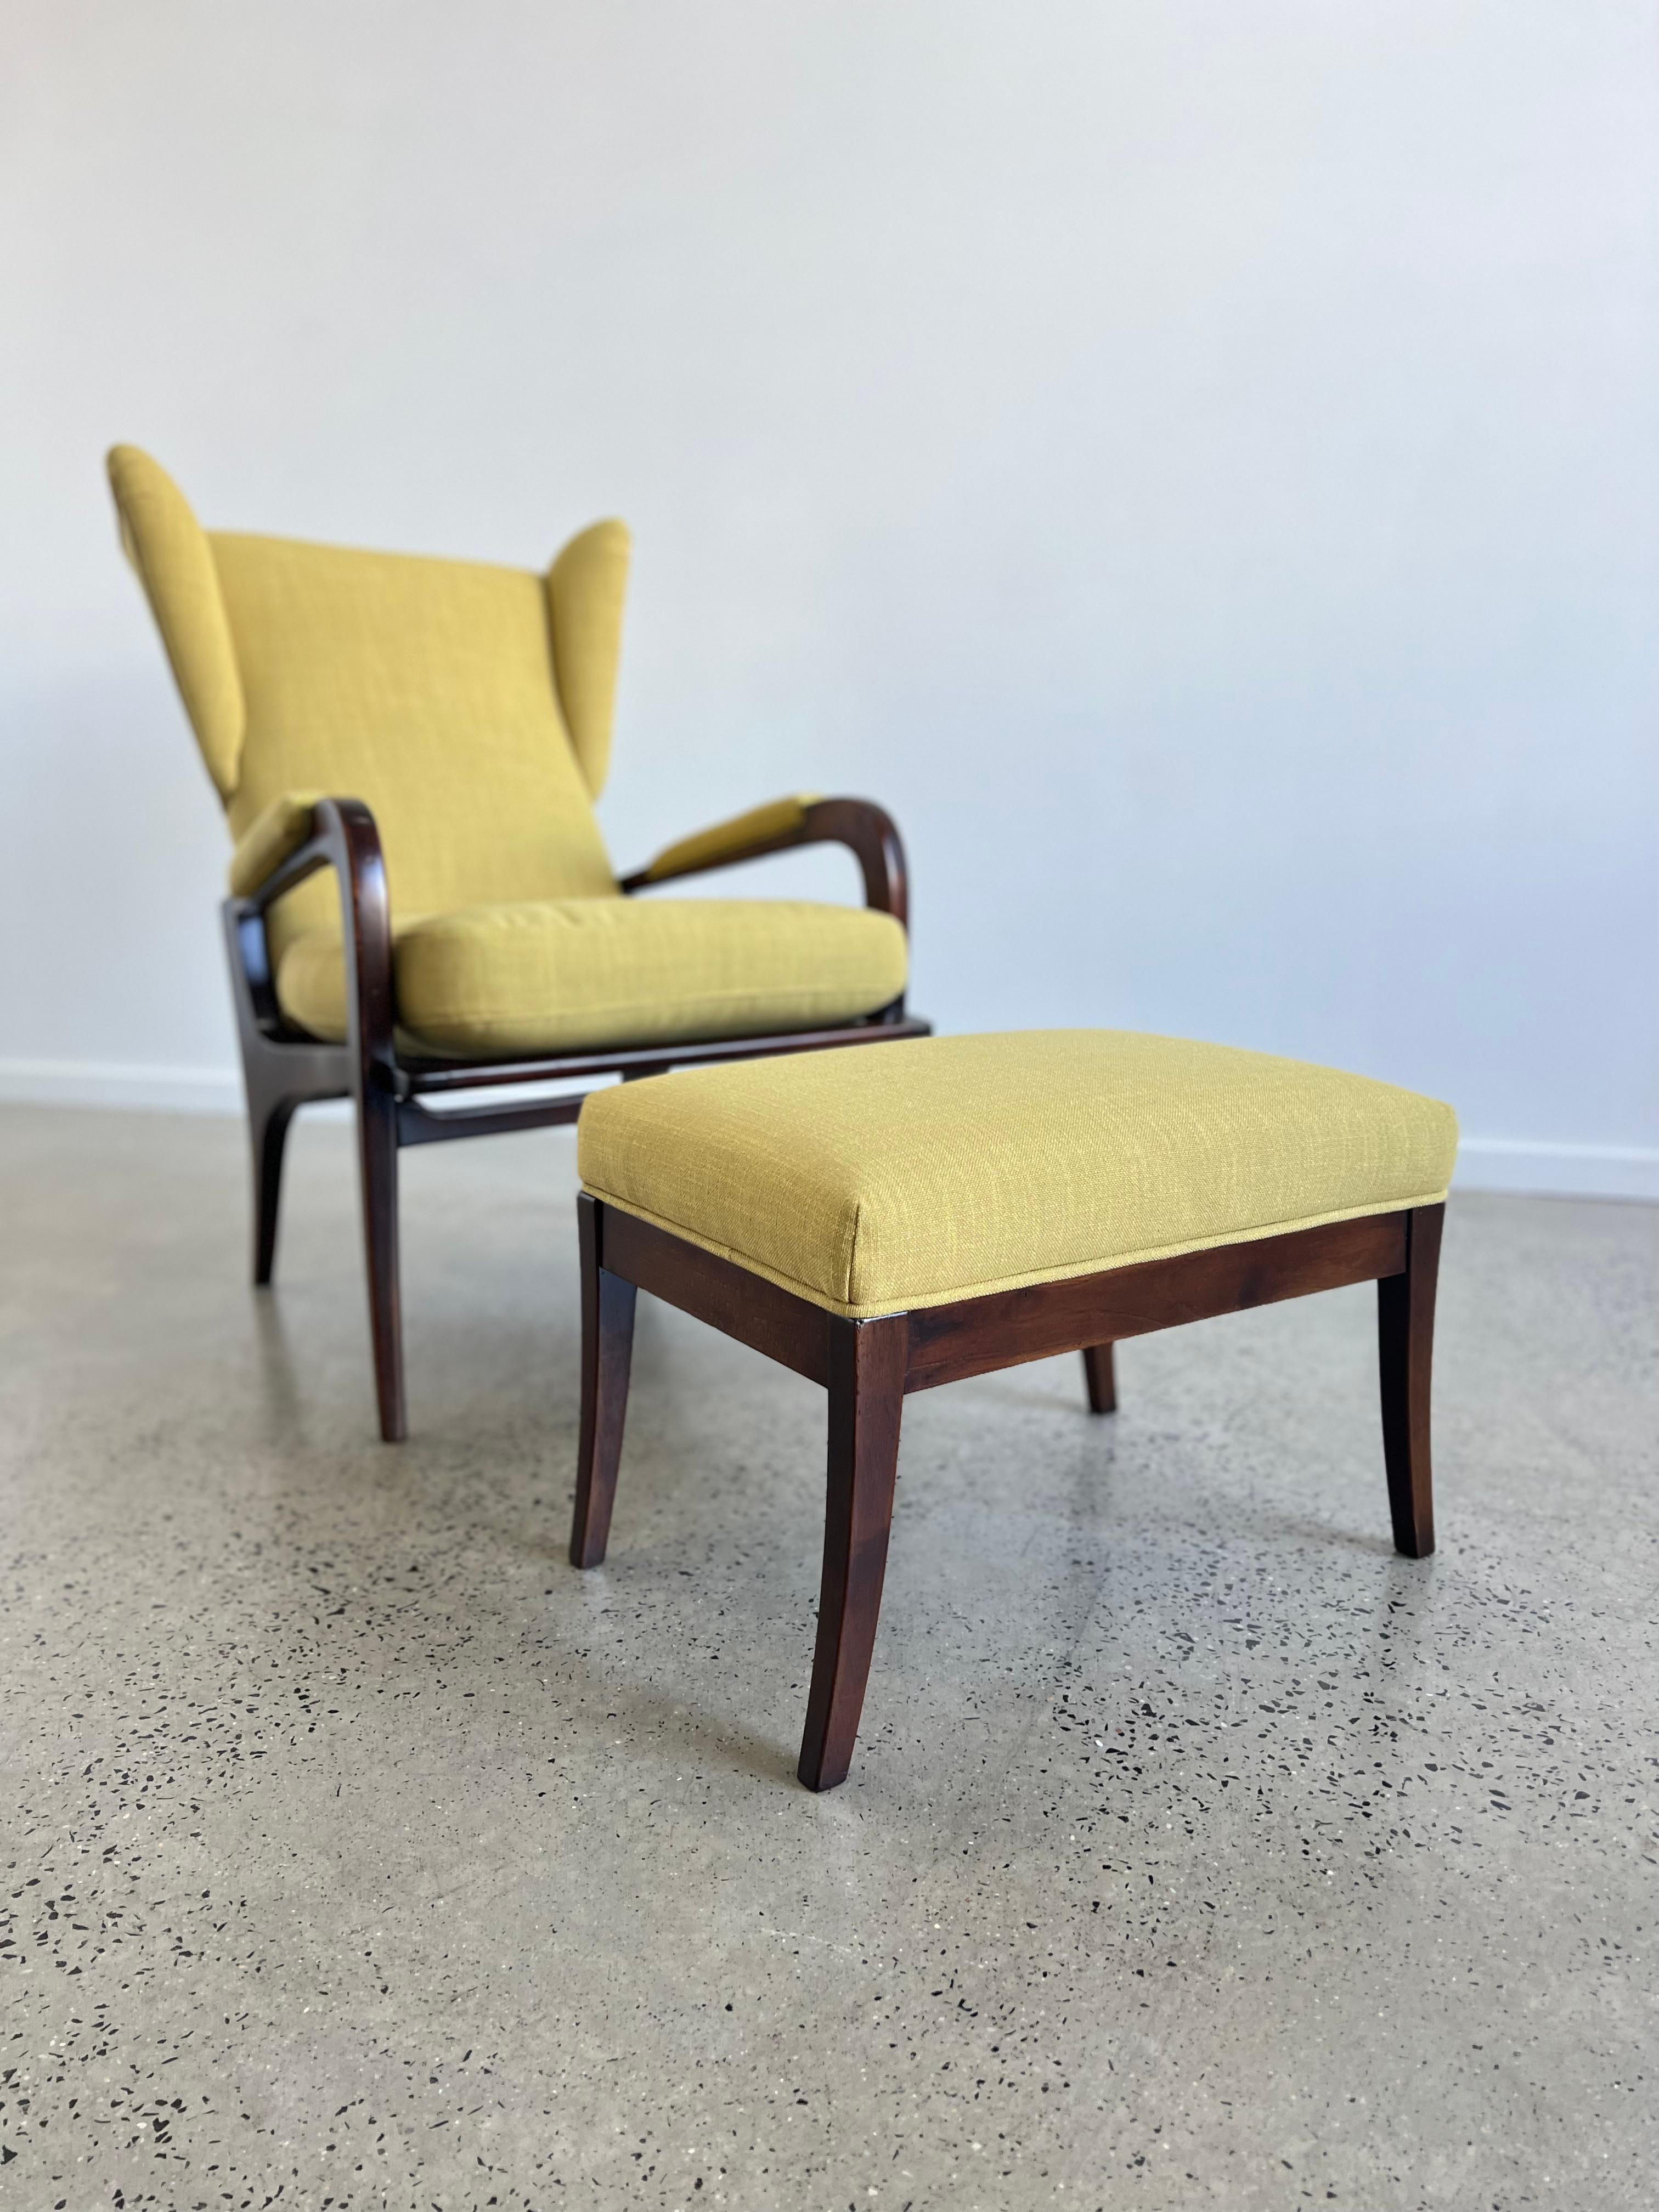 Mid-20th Century Renzo Franchi for Brianzola Camera Lounge Reclinable Armchair with Ottoman For Sale